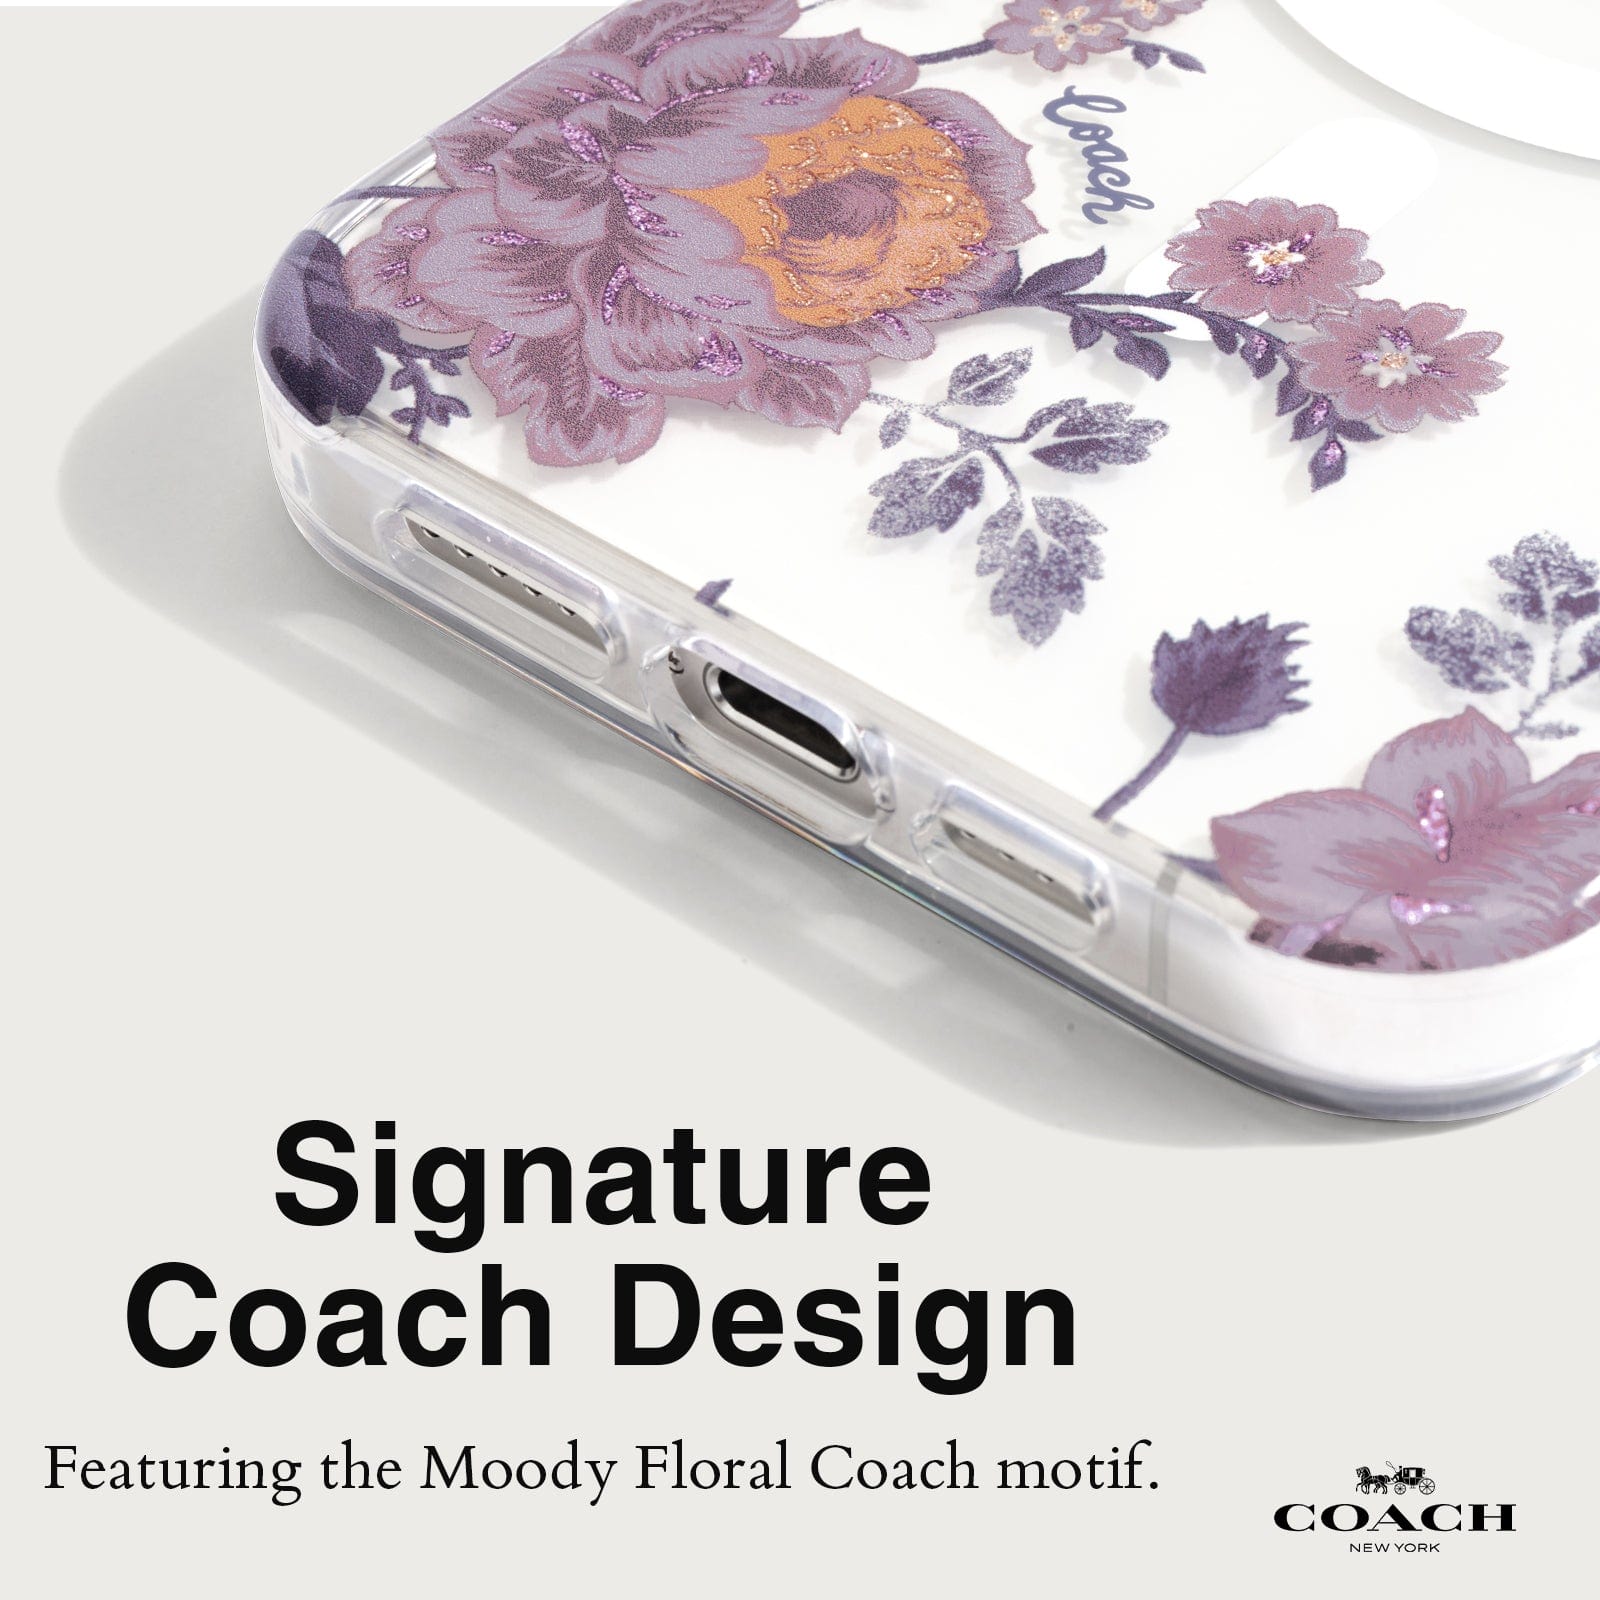 SIGNATURE COACH DESIGN. FEATURING THE MOODY FLORAL COACK MOTIF